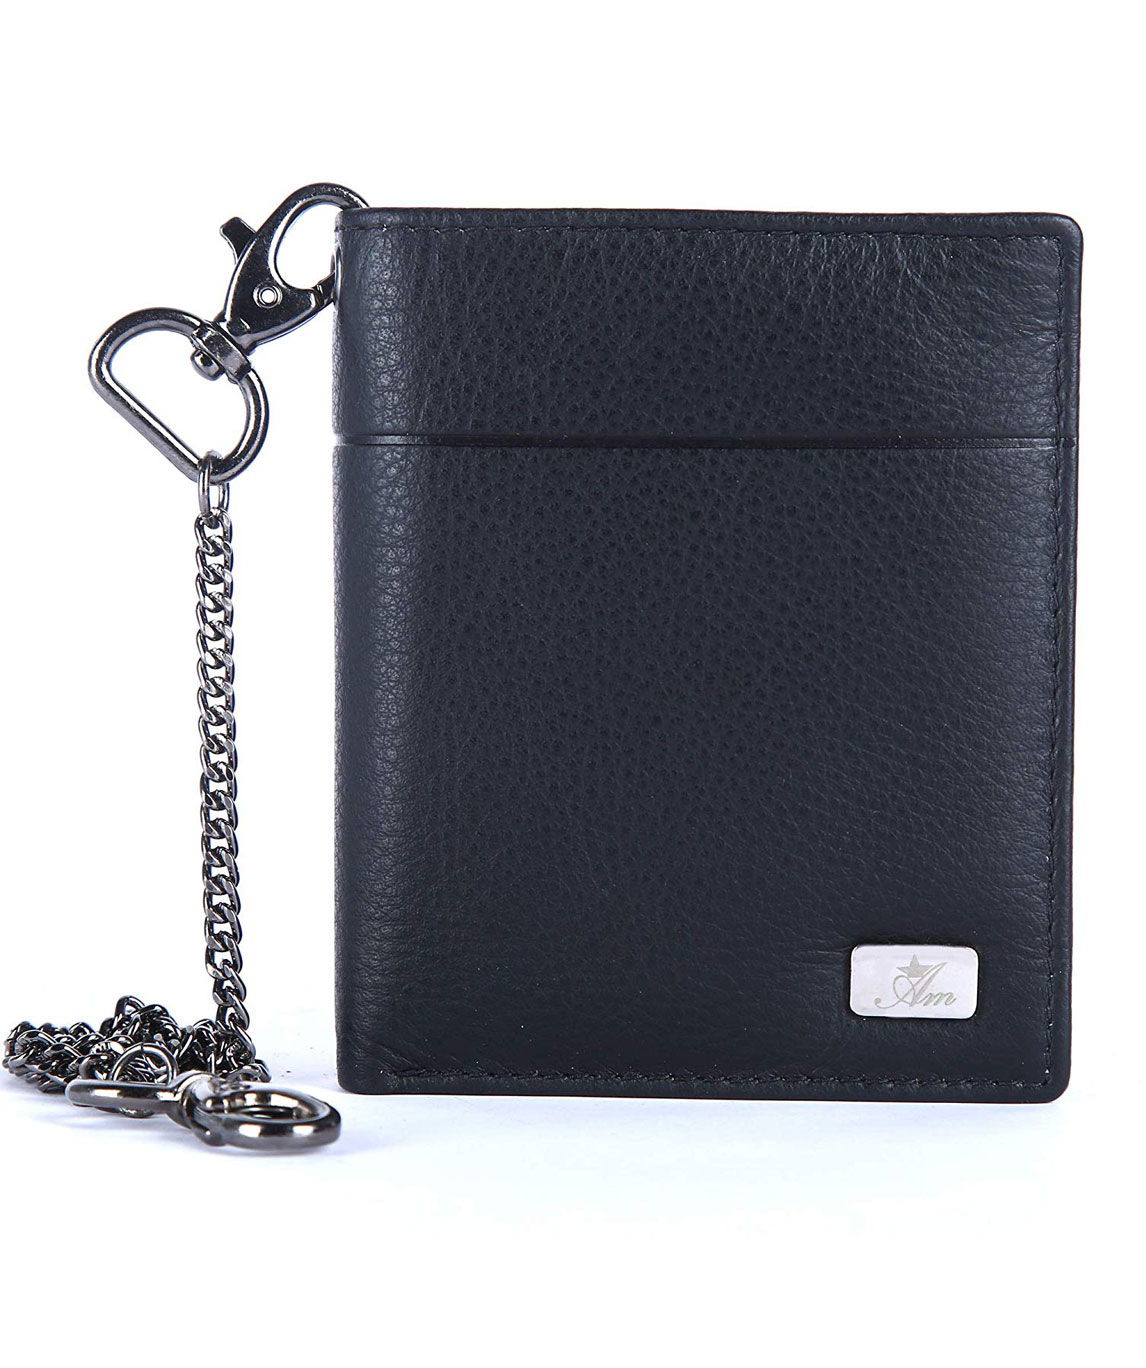 Wallets (वॉलेट) - Upto 50% to 80% OFF on Wallets for Men and Women Online  at Best Prices in India - Flipkart.com